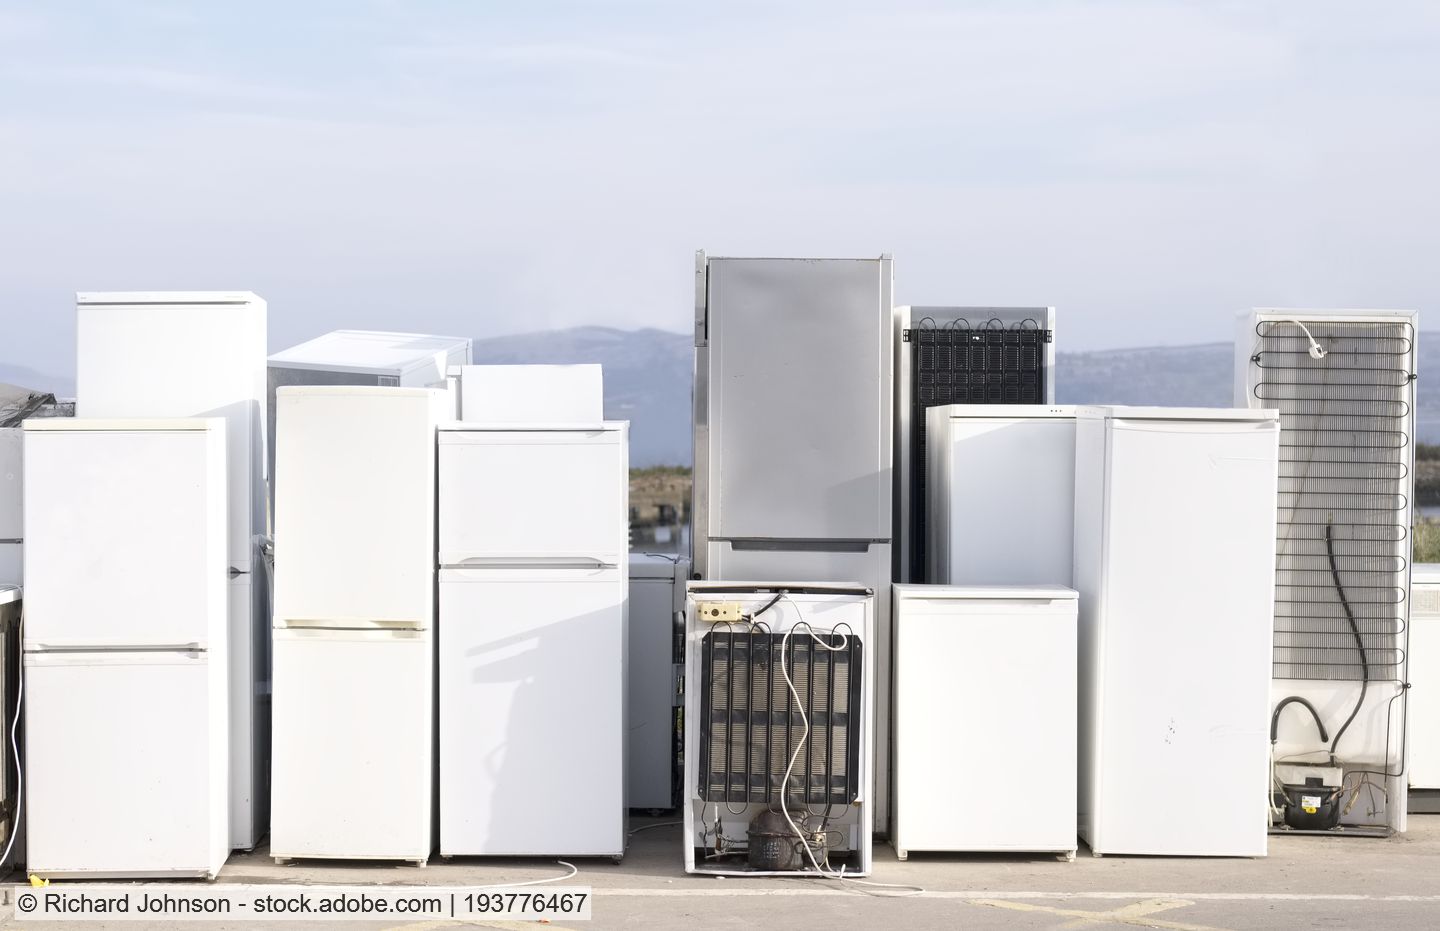 Stena Metall sells German fridge recycling business to Munich investment firm